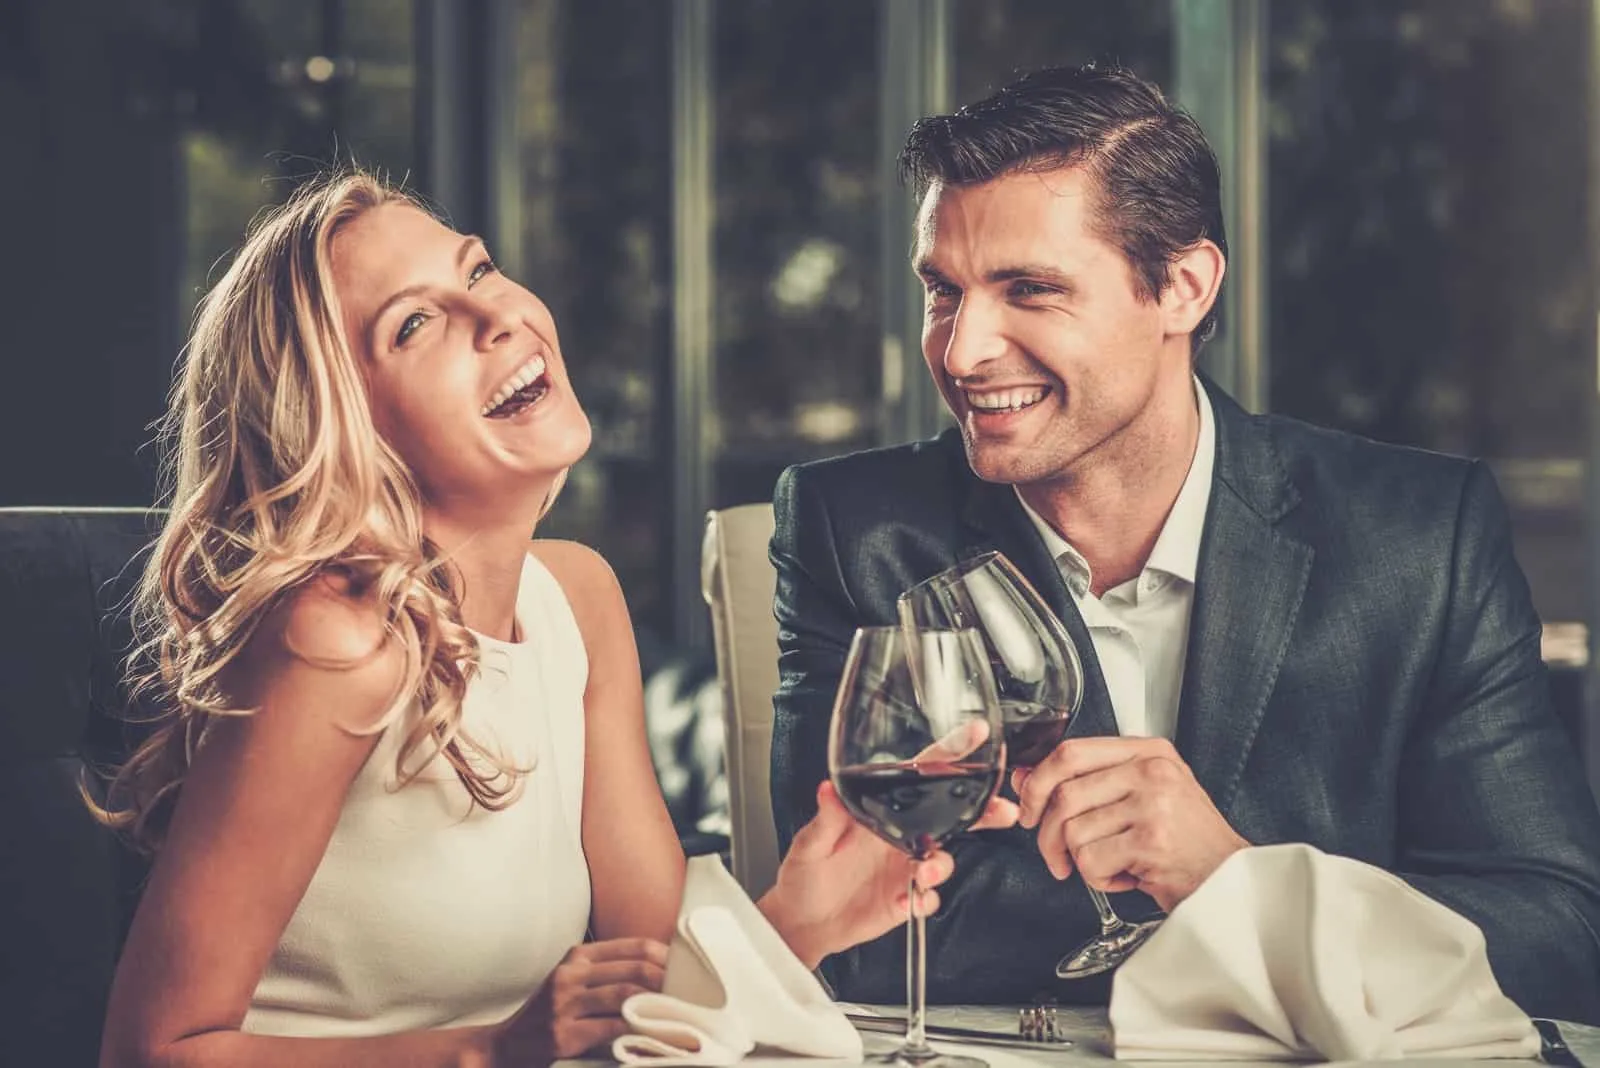 the man and woman at dinner laugh